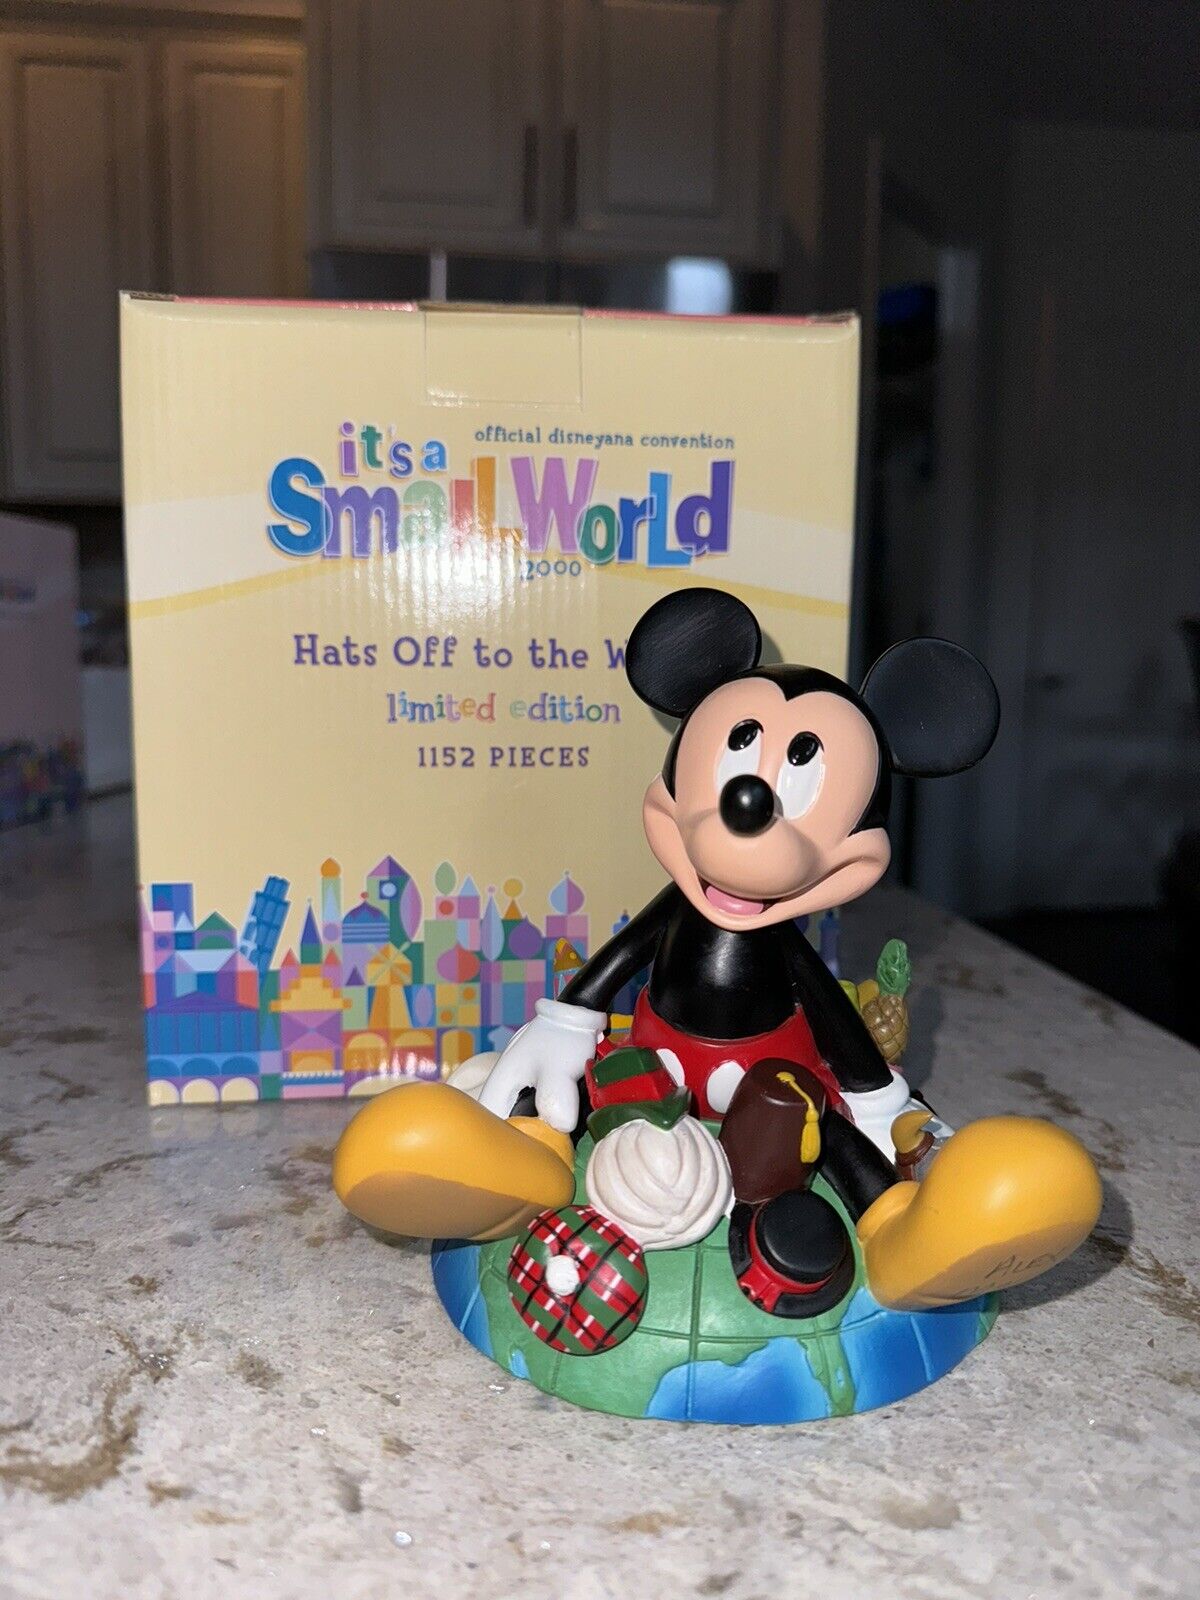 Disneyana Convention 2000 Hats Off to the World Mickey Signed Figurine LE1152